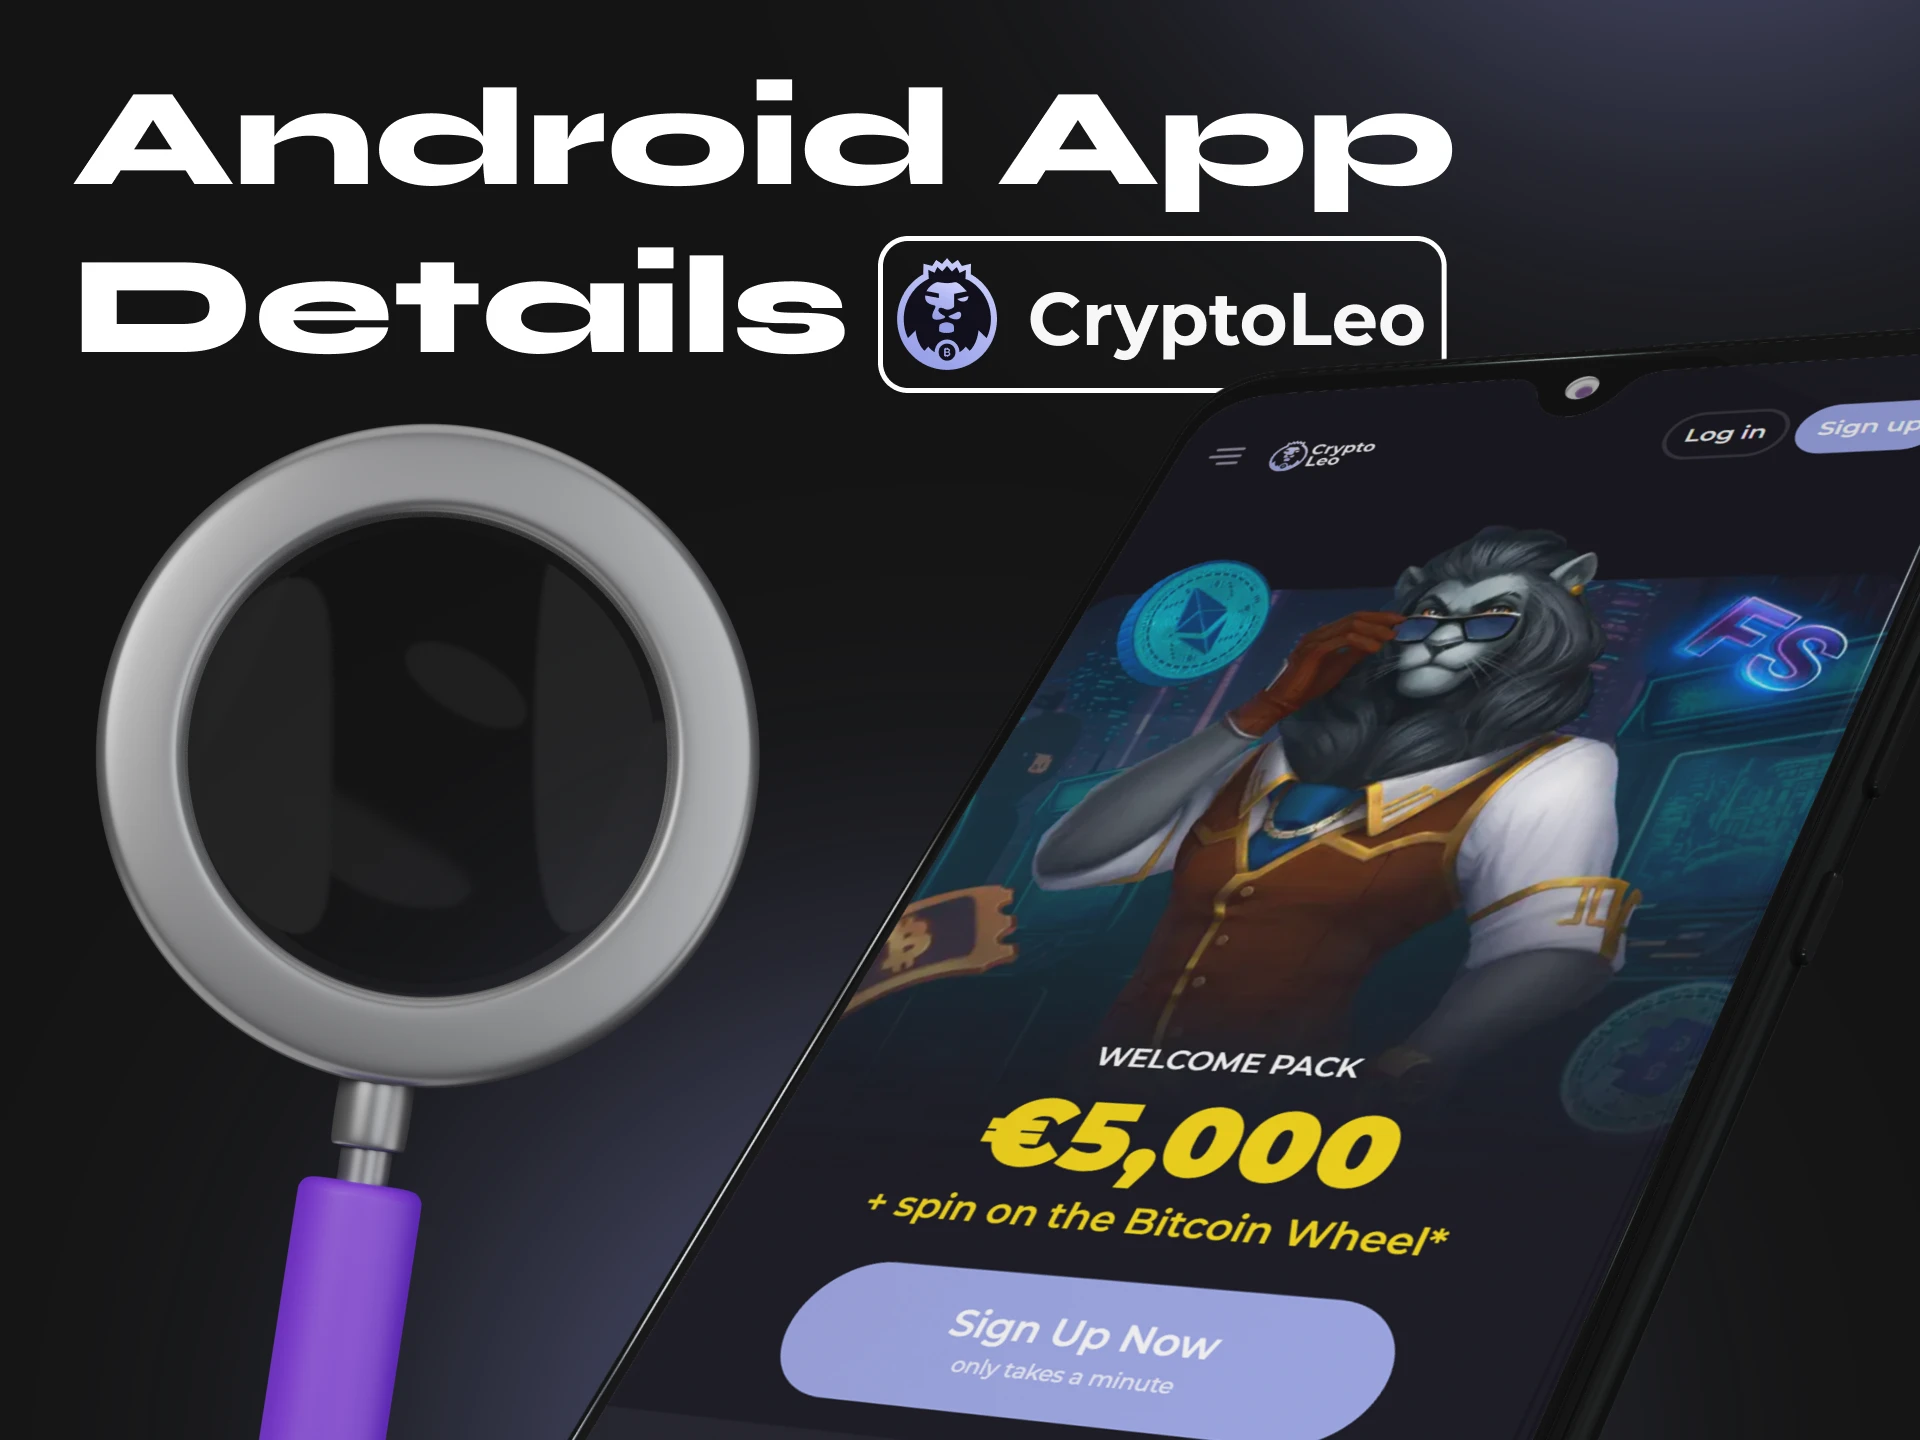 On Android you can use the Cryptoleo mobile site, it does not take up any space on your phone.